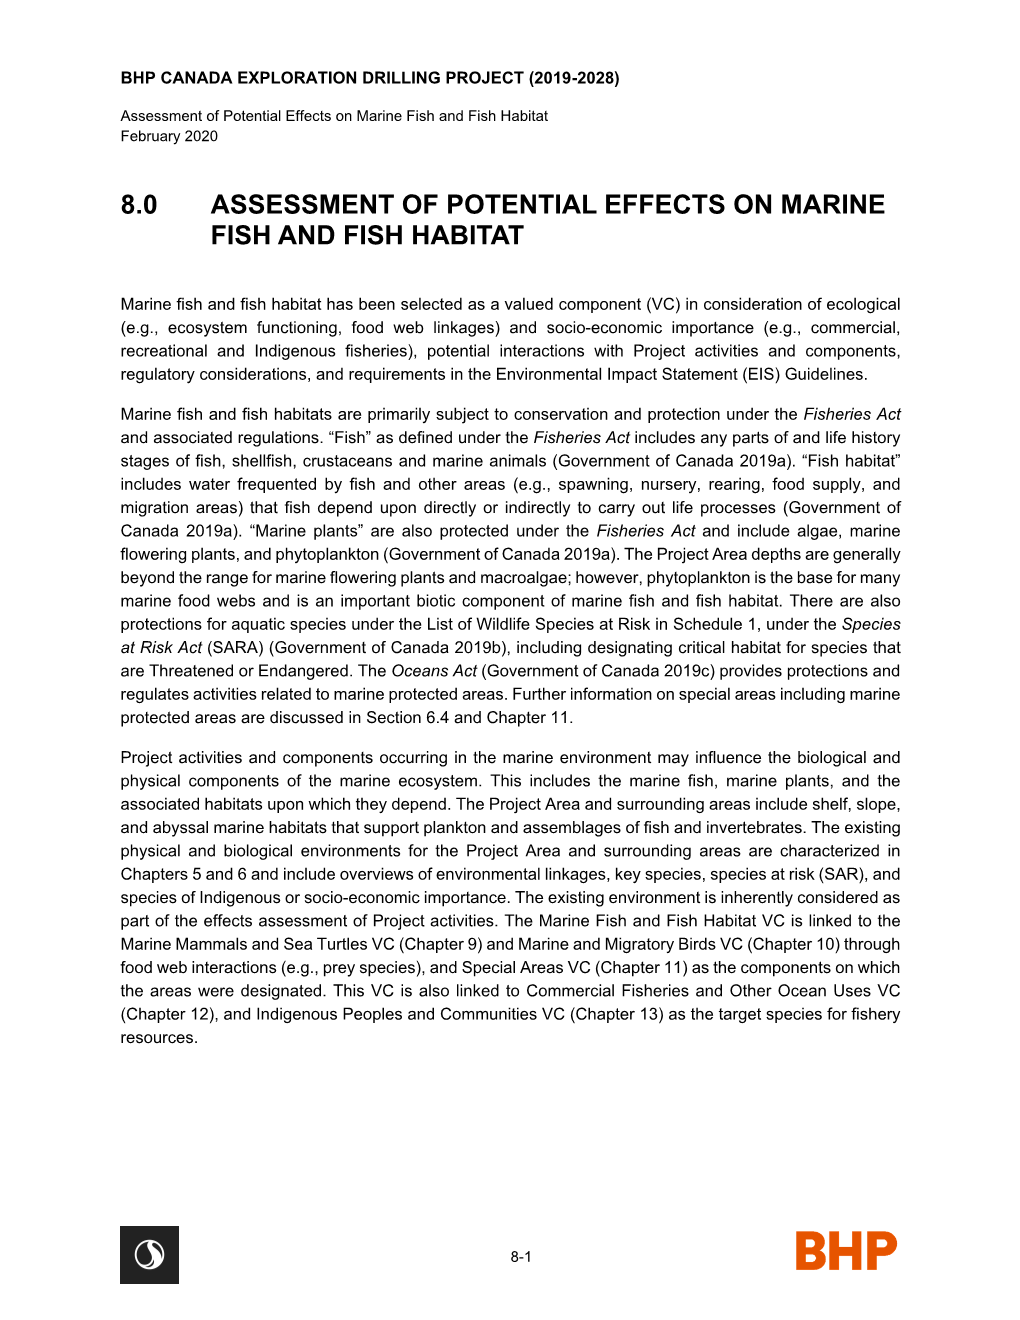 8.0 Assessment of Potential Effects on Marine Fish and Fish Habitat